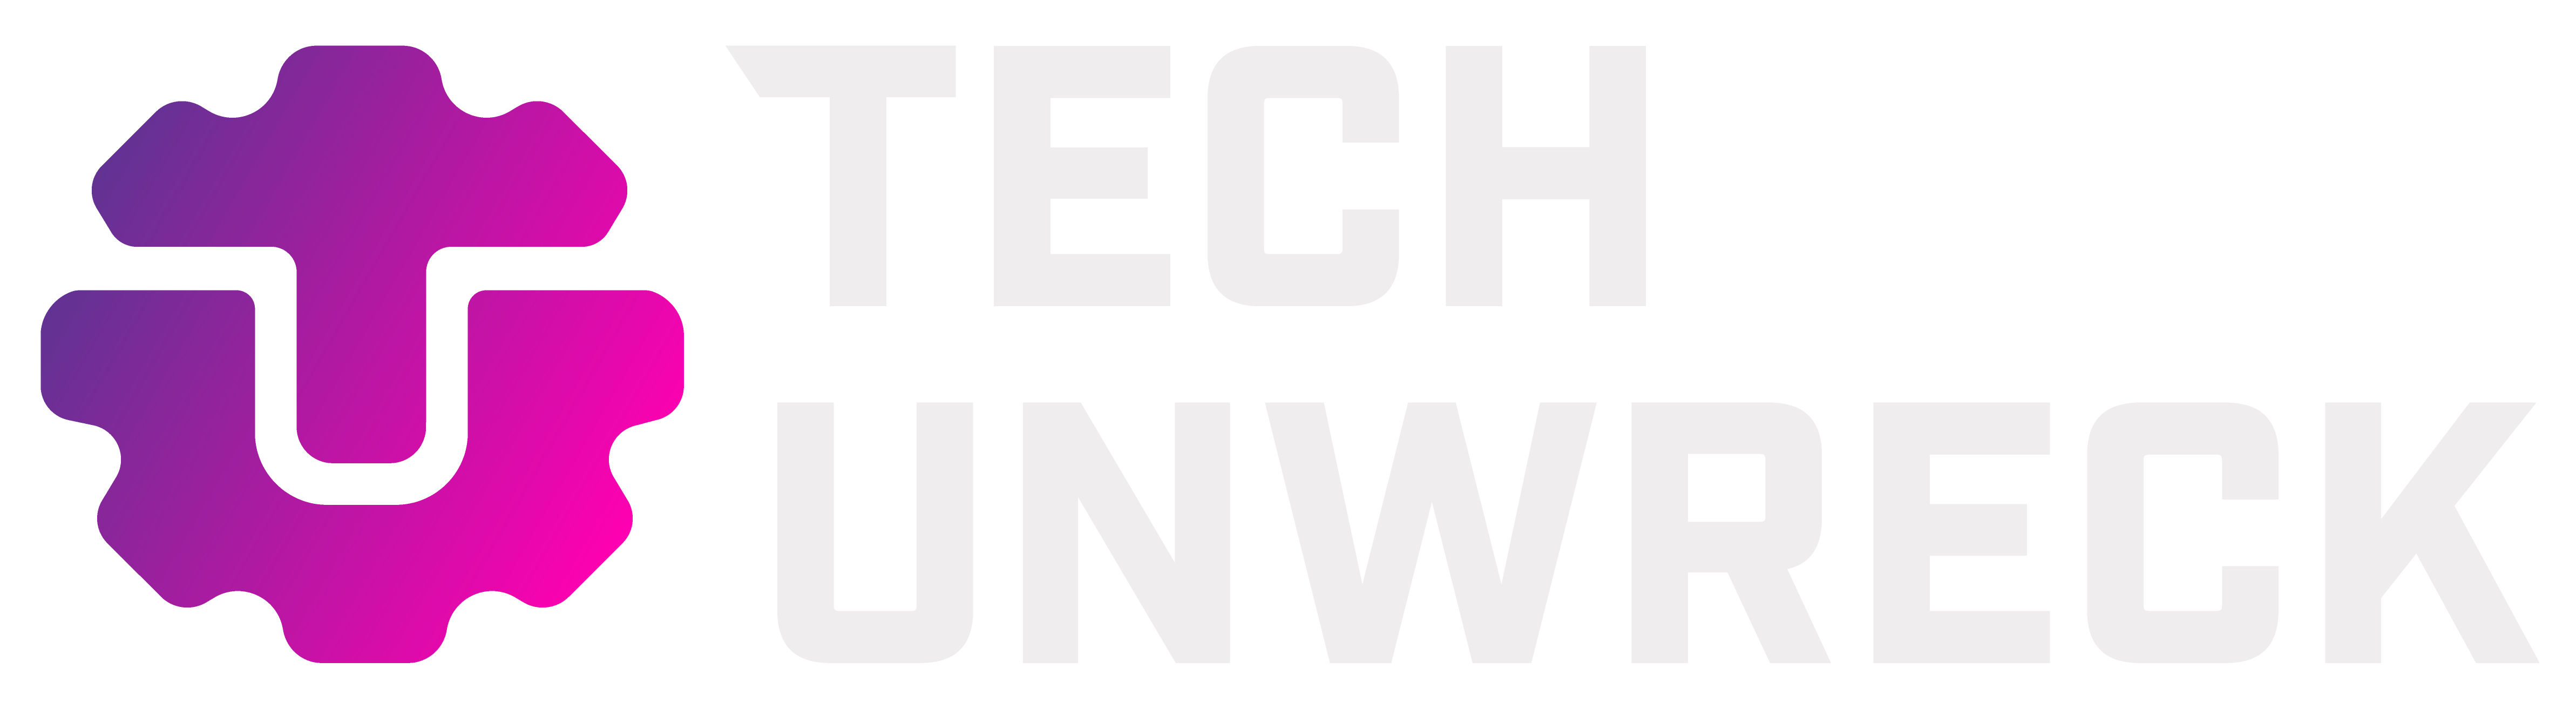 Tech_Unwrecked_Primary_Horizontal_Logo_Colored_with_White-1